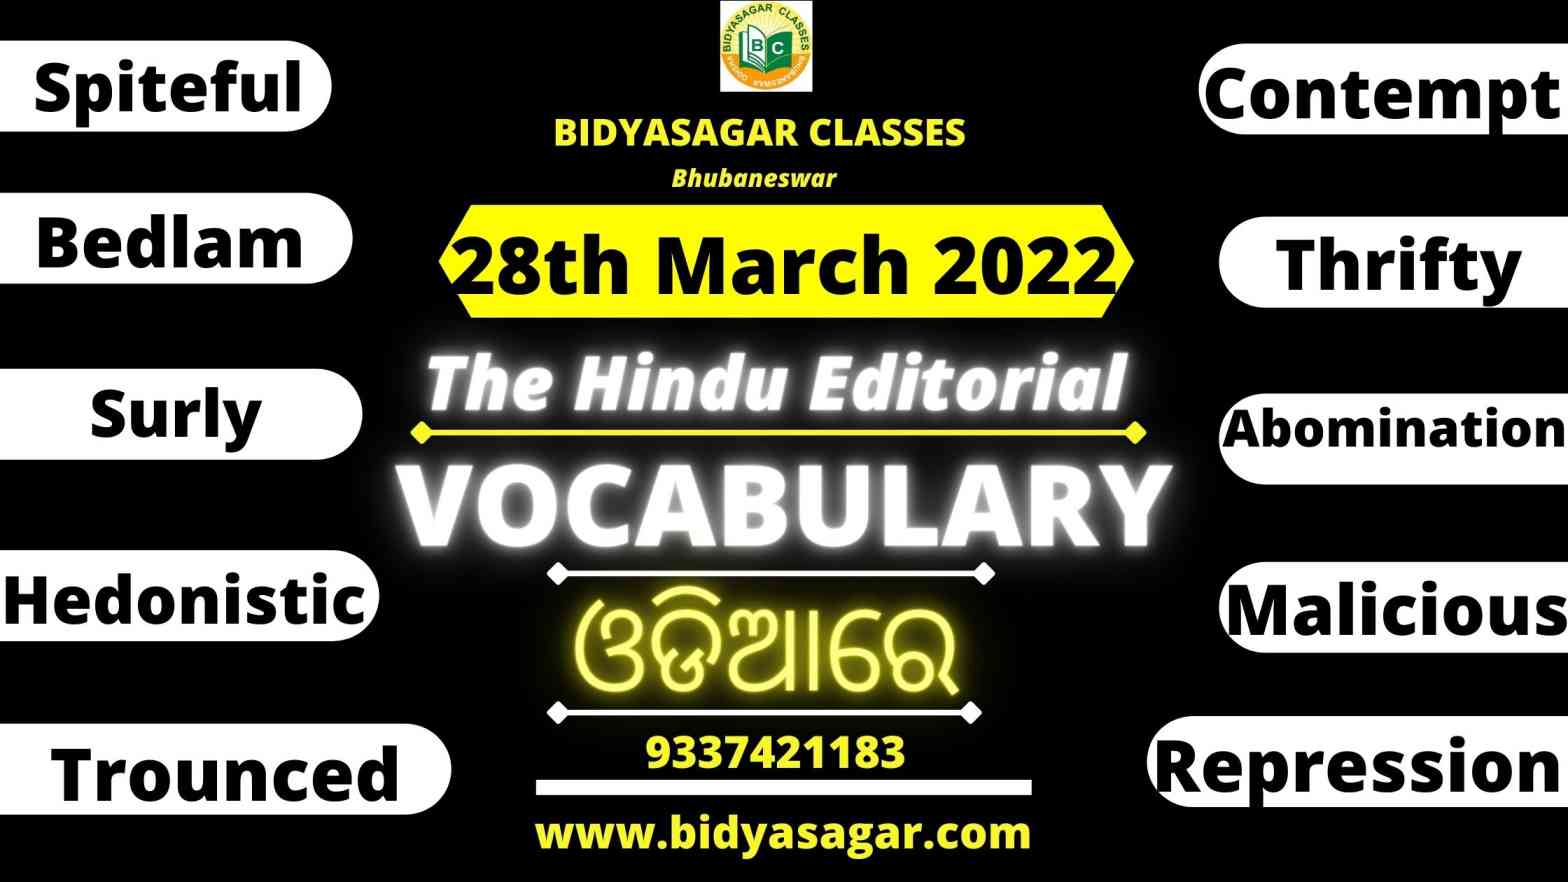 The Hindu Editorial Vocabulary of 28th March 2022